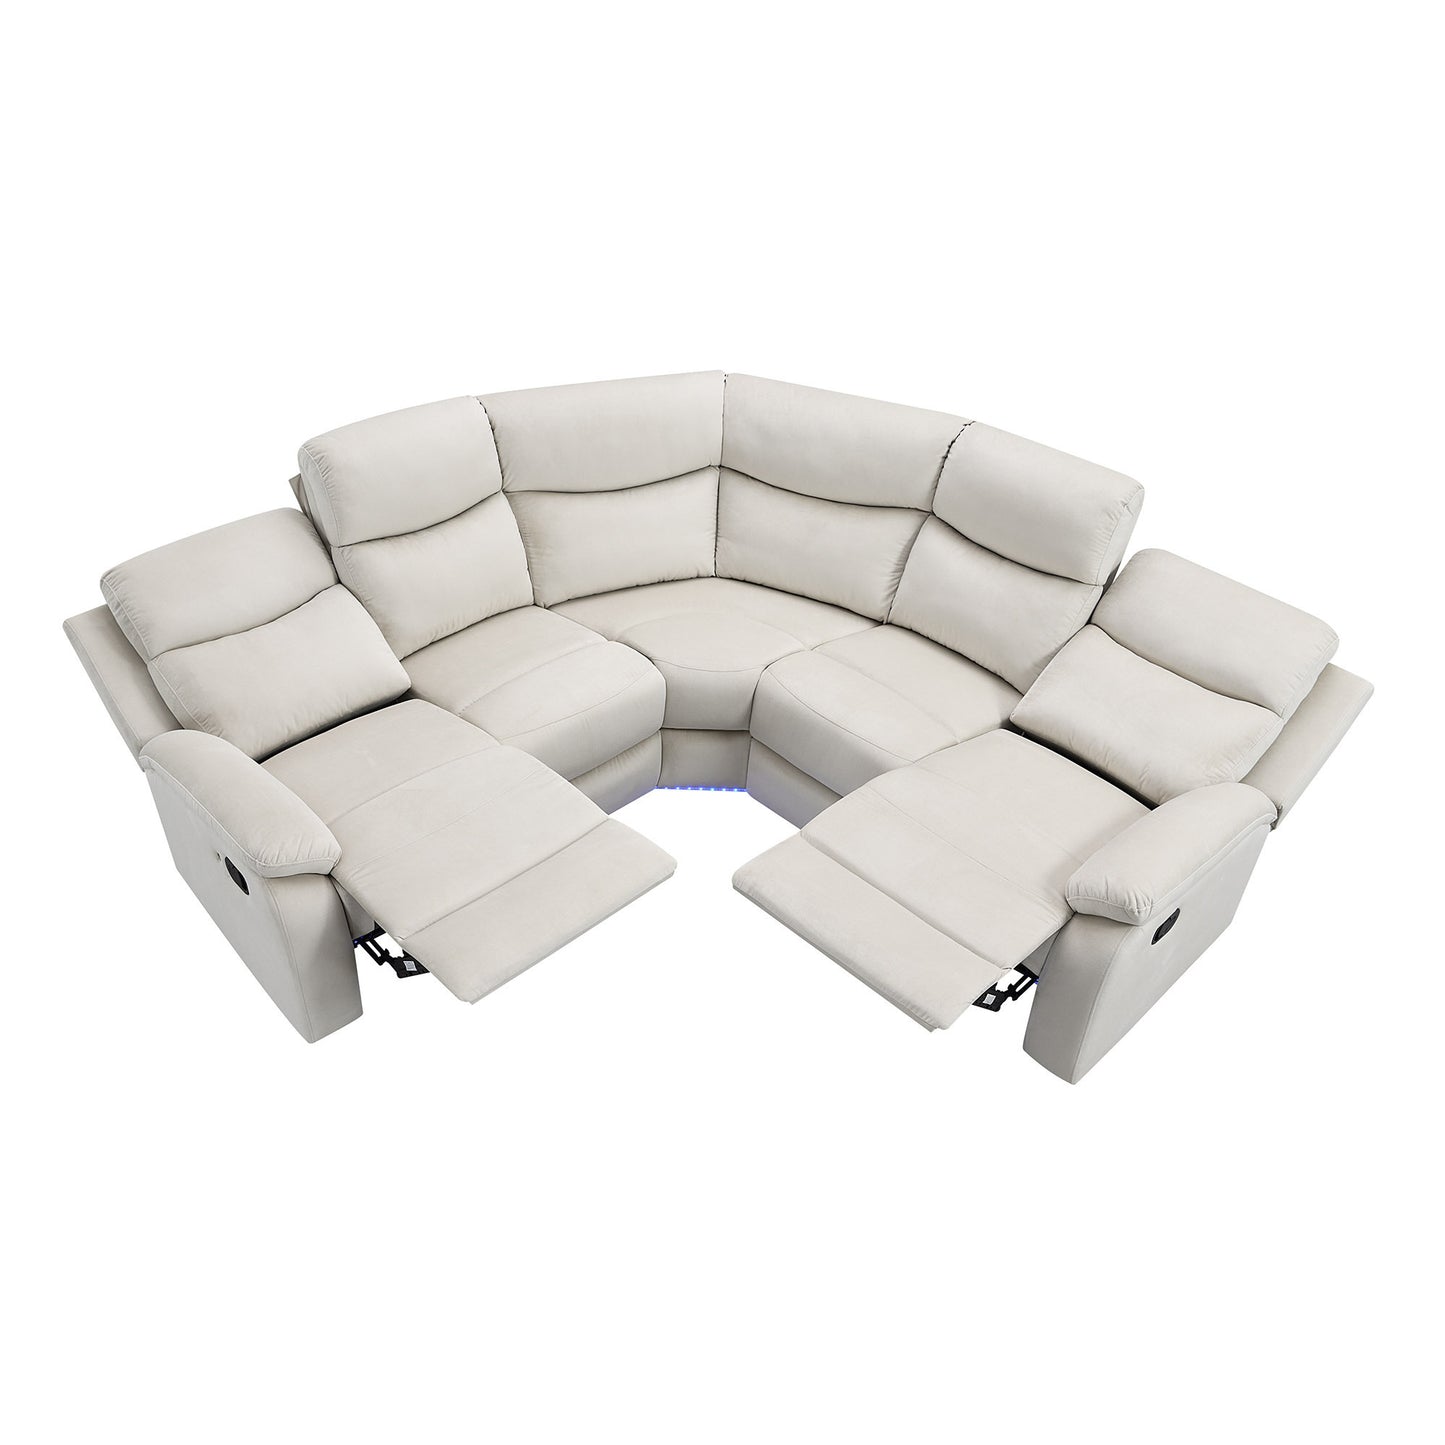 82.6" Home Theater Seating Seats Manual Chairs Recliner with LED Light Strip for Living Room, Beige